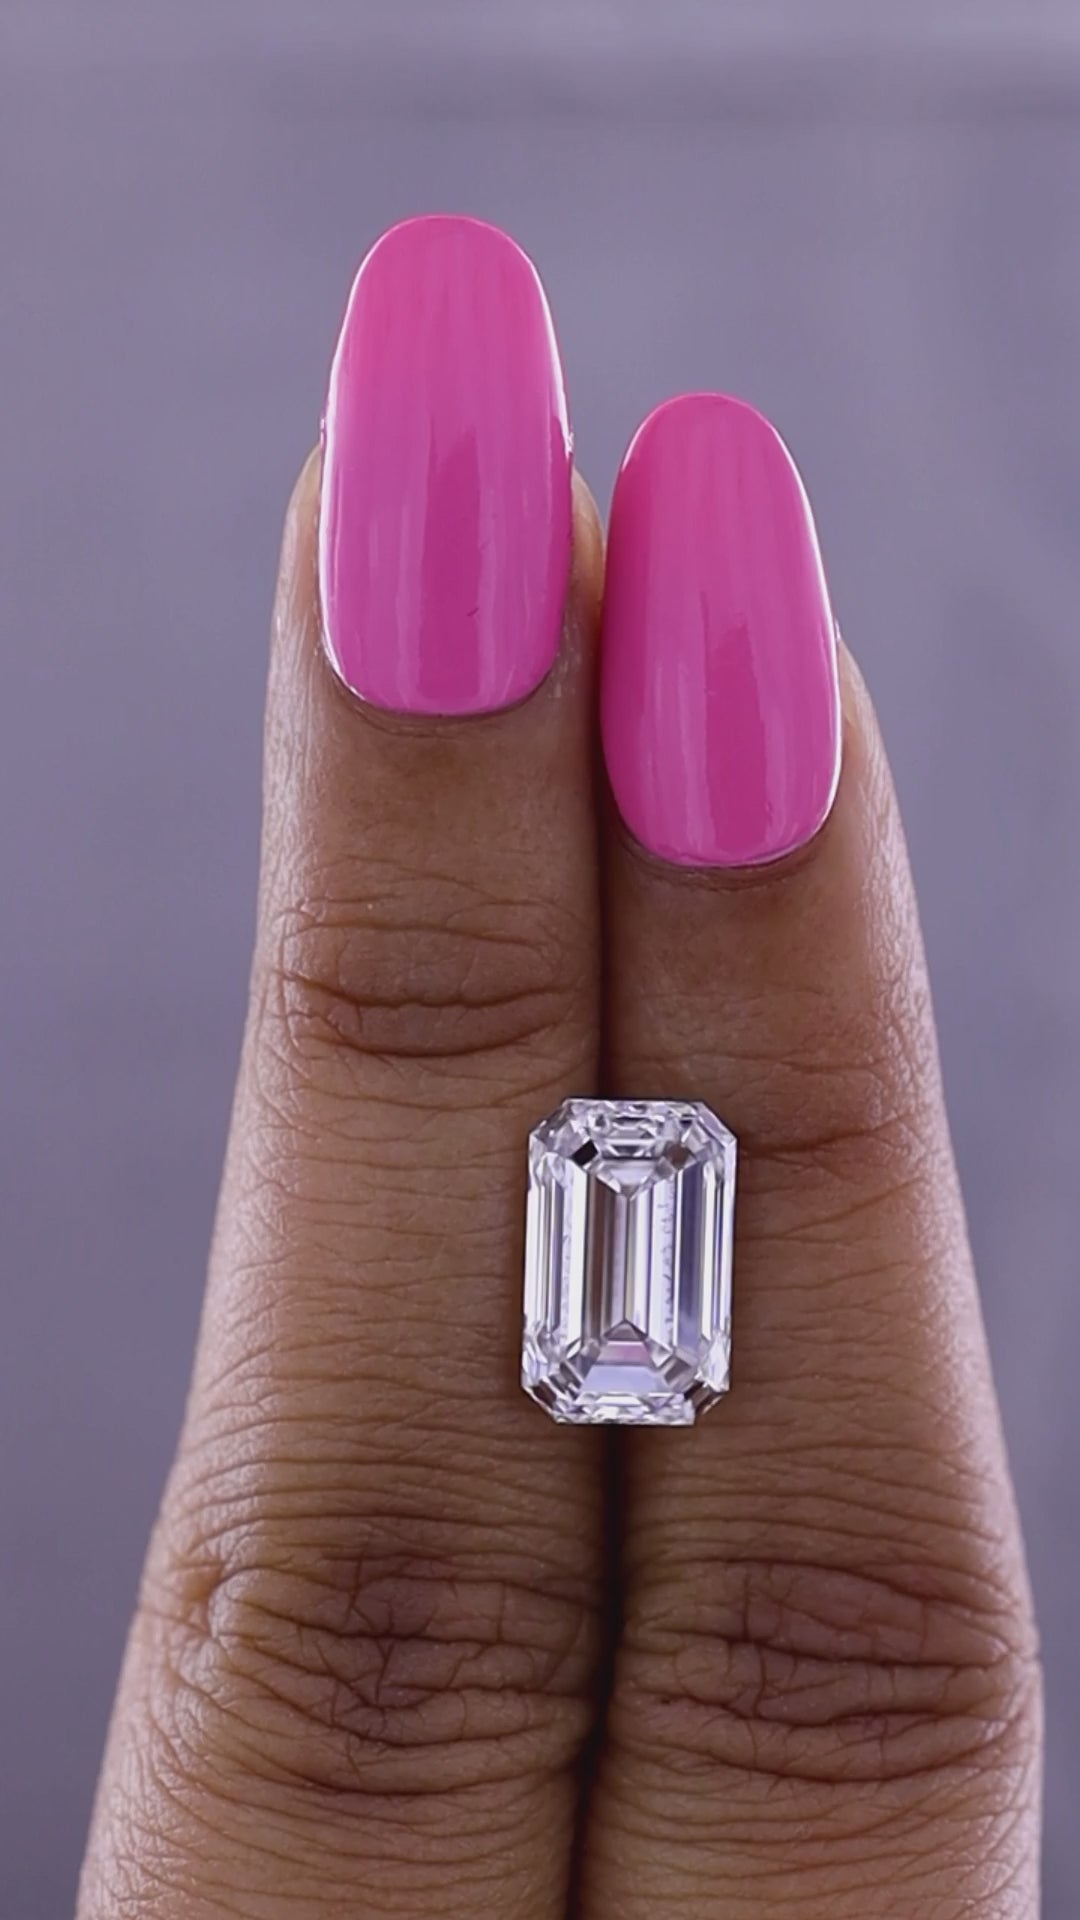 Discover the unparalleled beauty and investment potential of a flawless 5.00-carat emerald-cut diamond. Mined in South Africa and available exclusively in Geneva by special request, this GIA-certified gem diamond represents the pinnacle of rarity and perfection. Secure your personal consultation today.